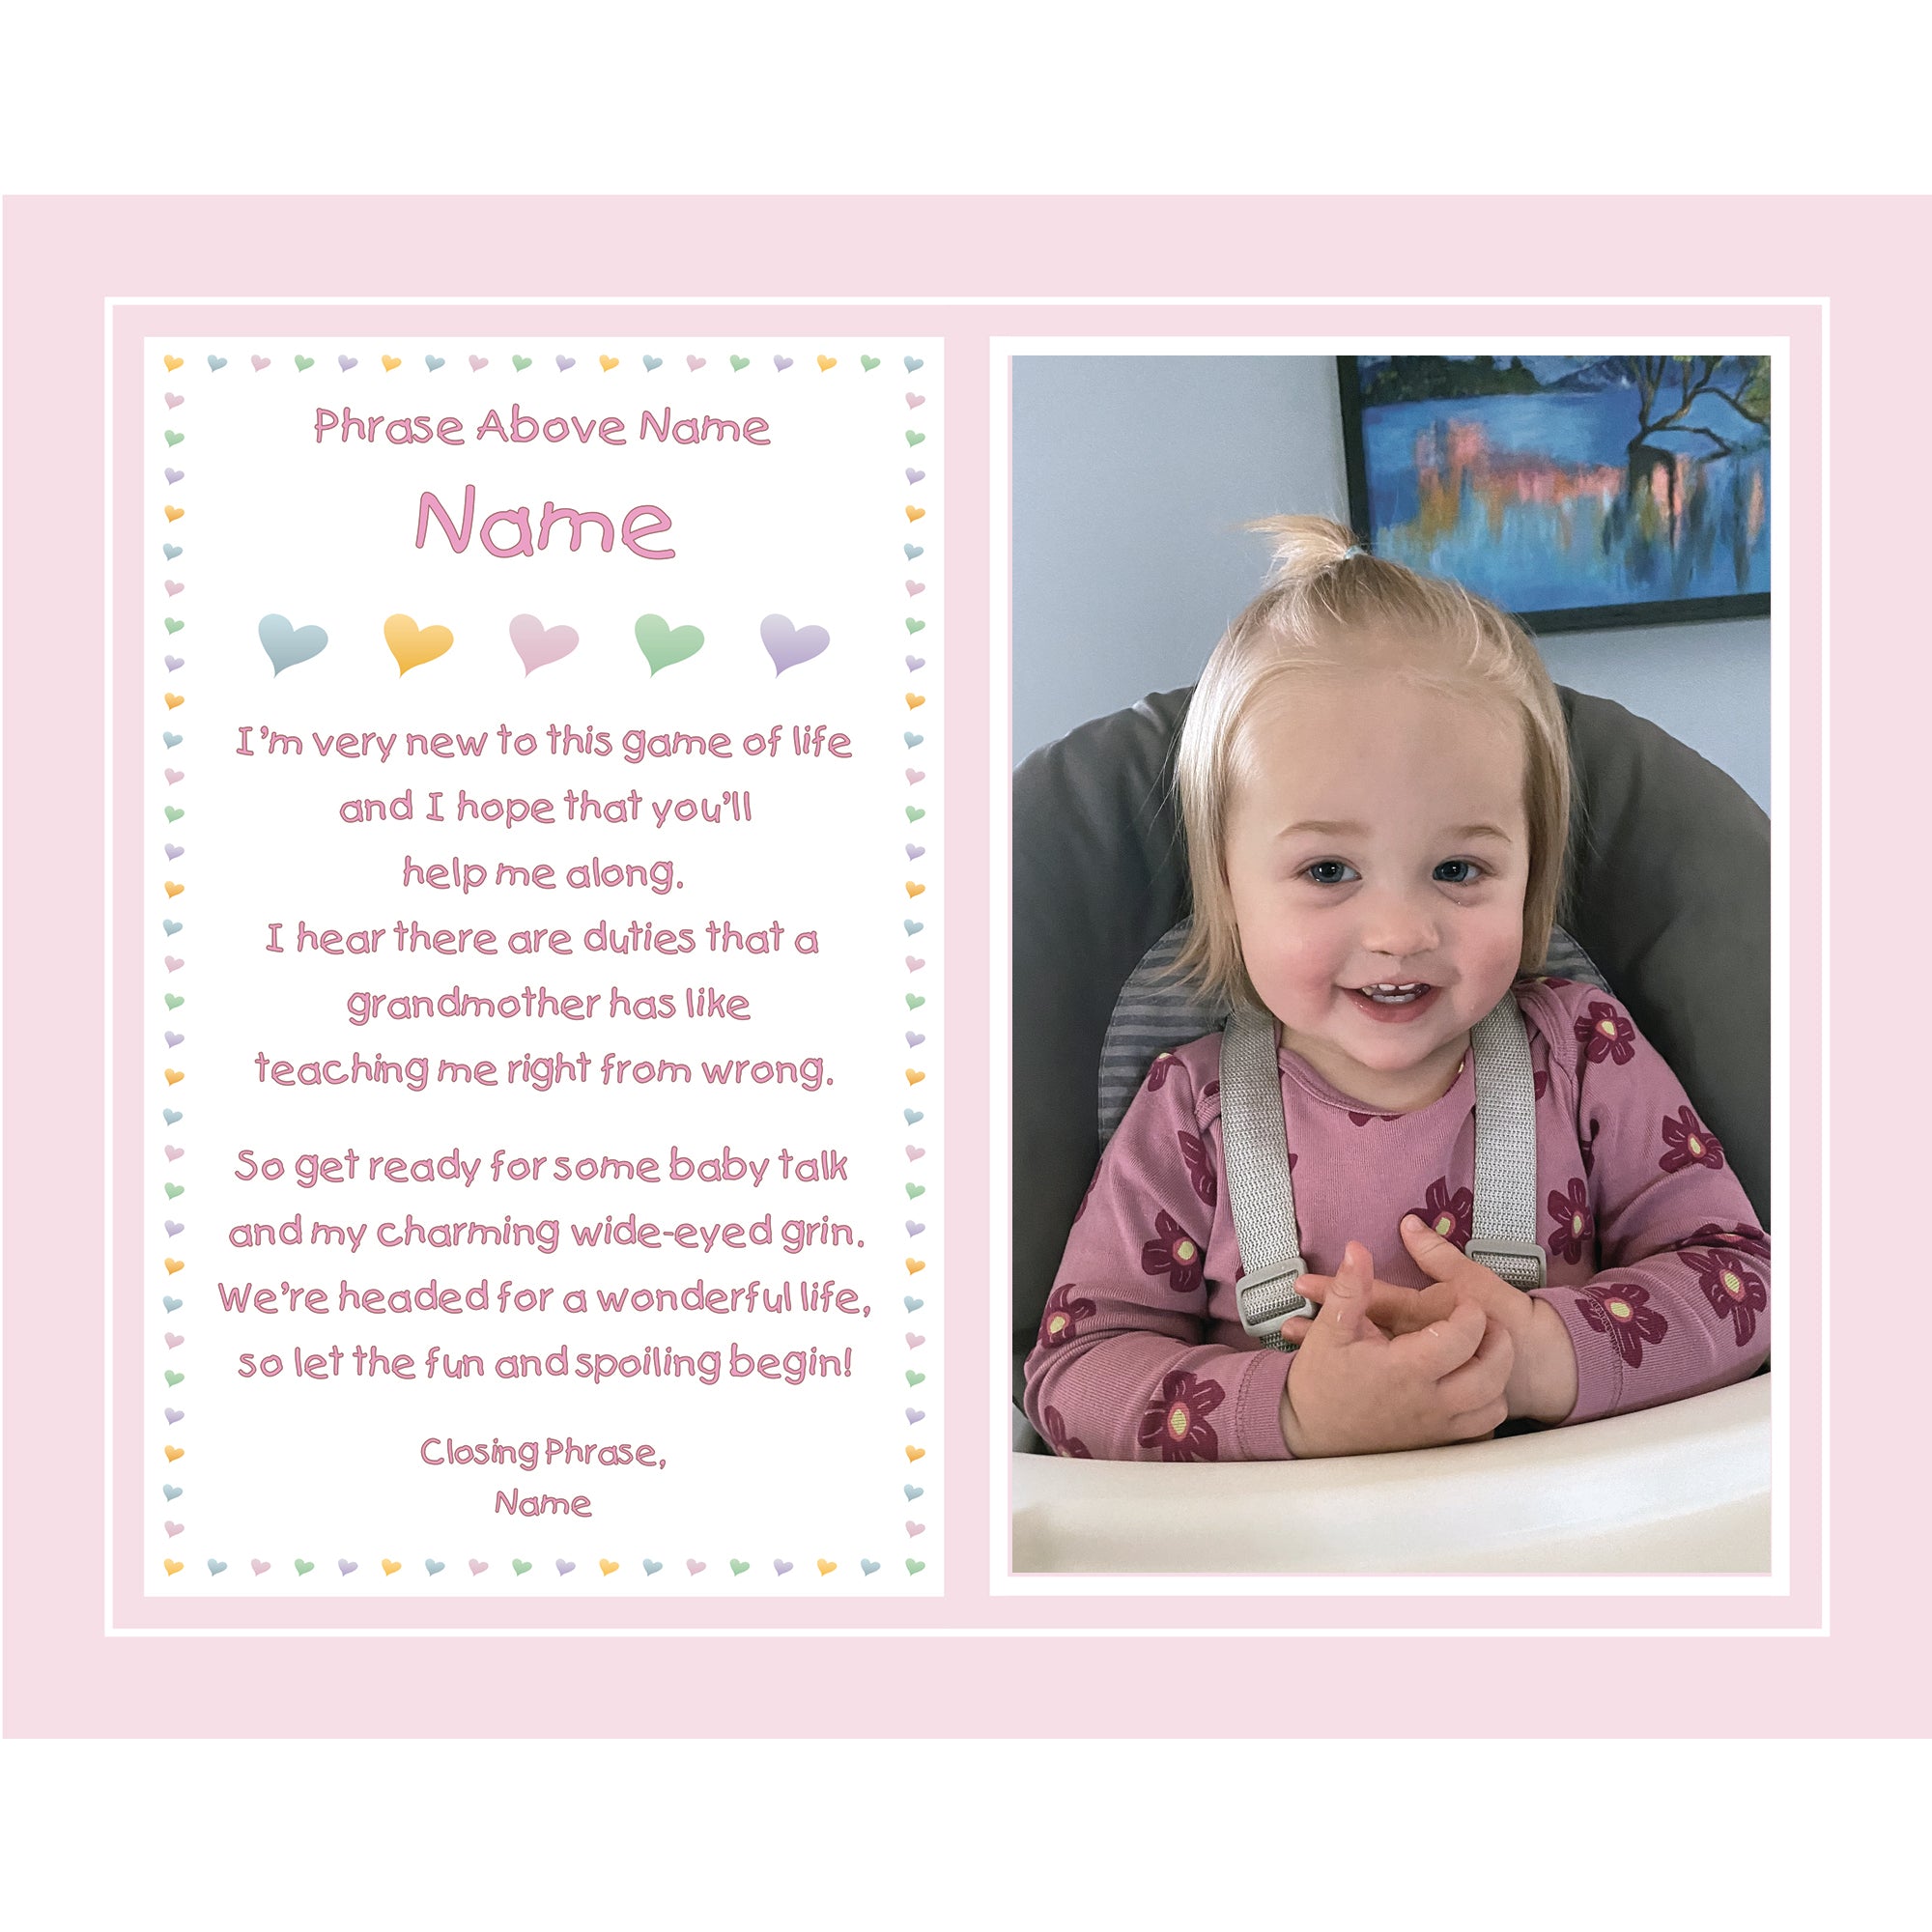 Personalized Grandmother Gift from Granddaughter, Happy Mother's Day, Birthday or for a New Birth, Add Photo to Unframed 8x10 Inch Print